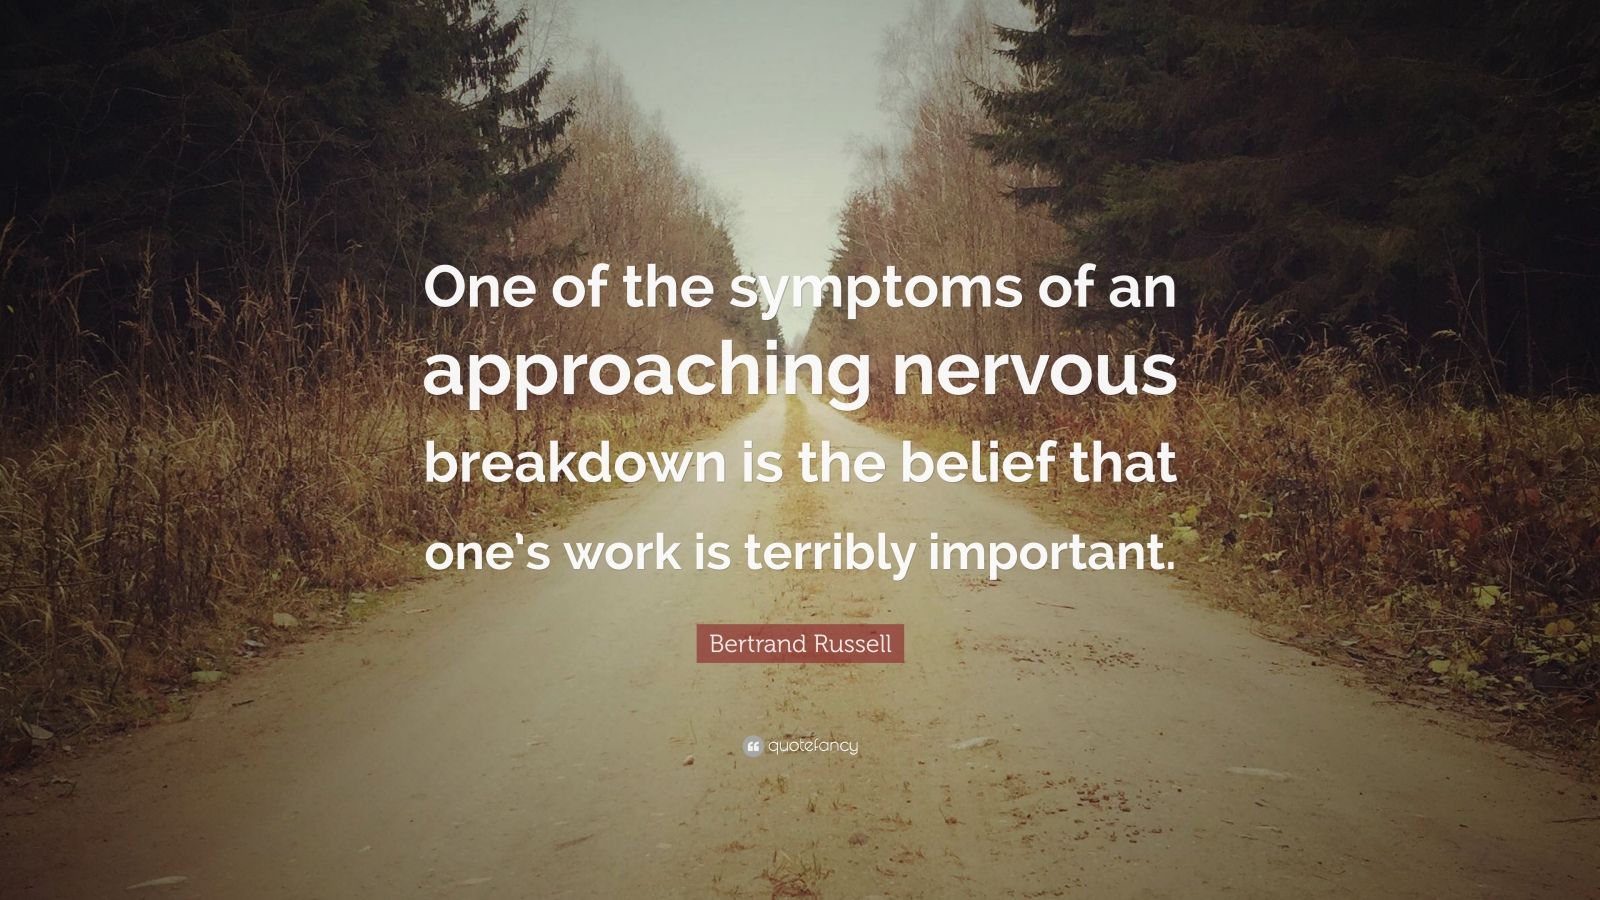 Bertrand Russell Quote “One of the symptoms of an